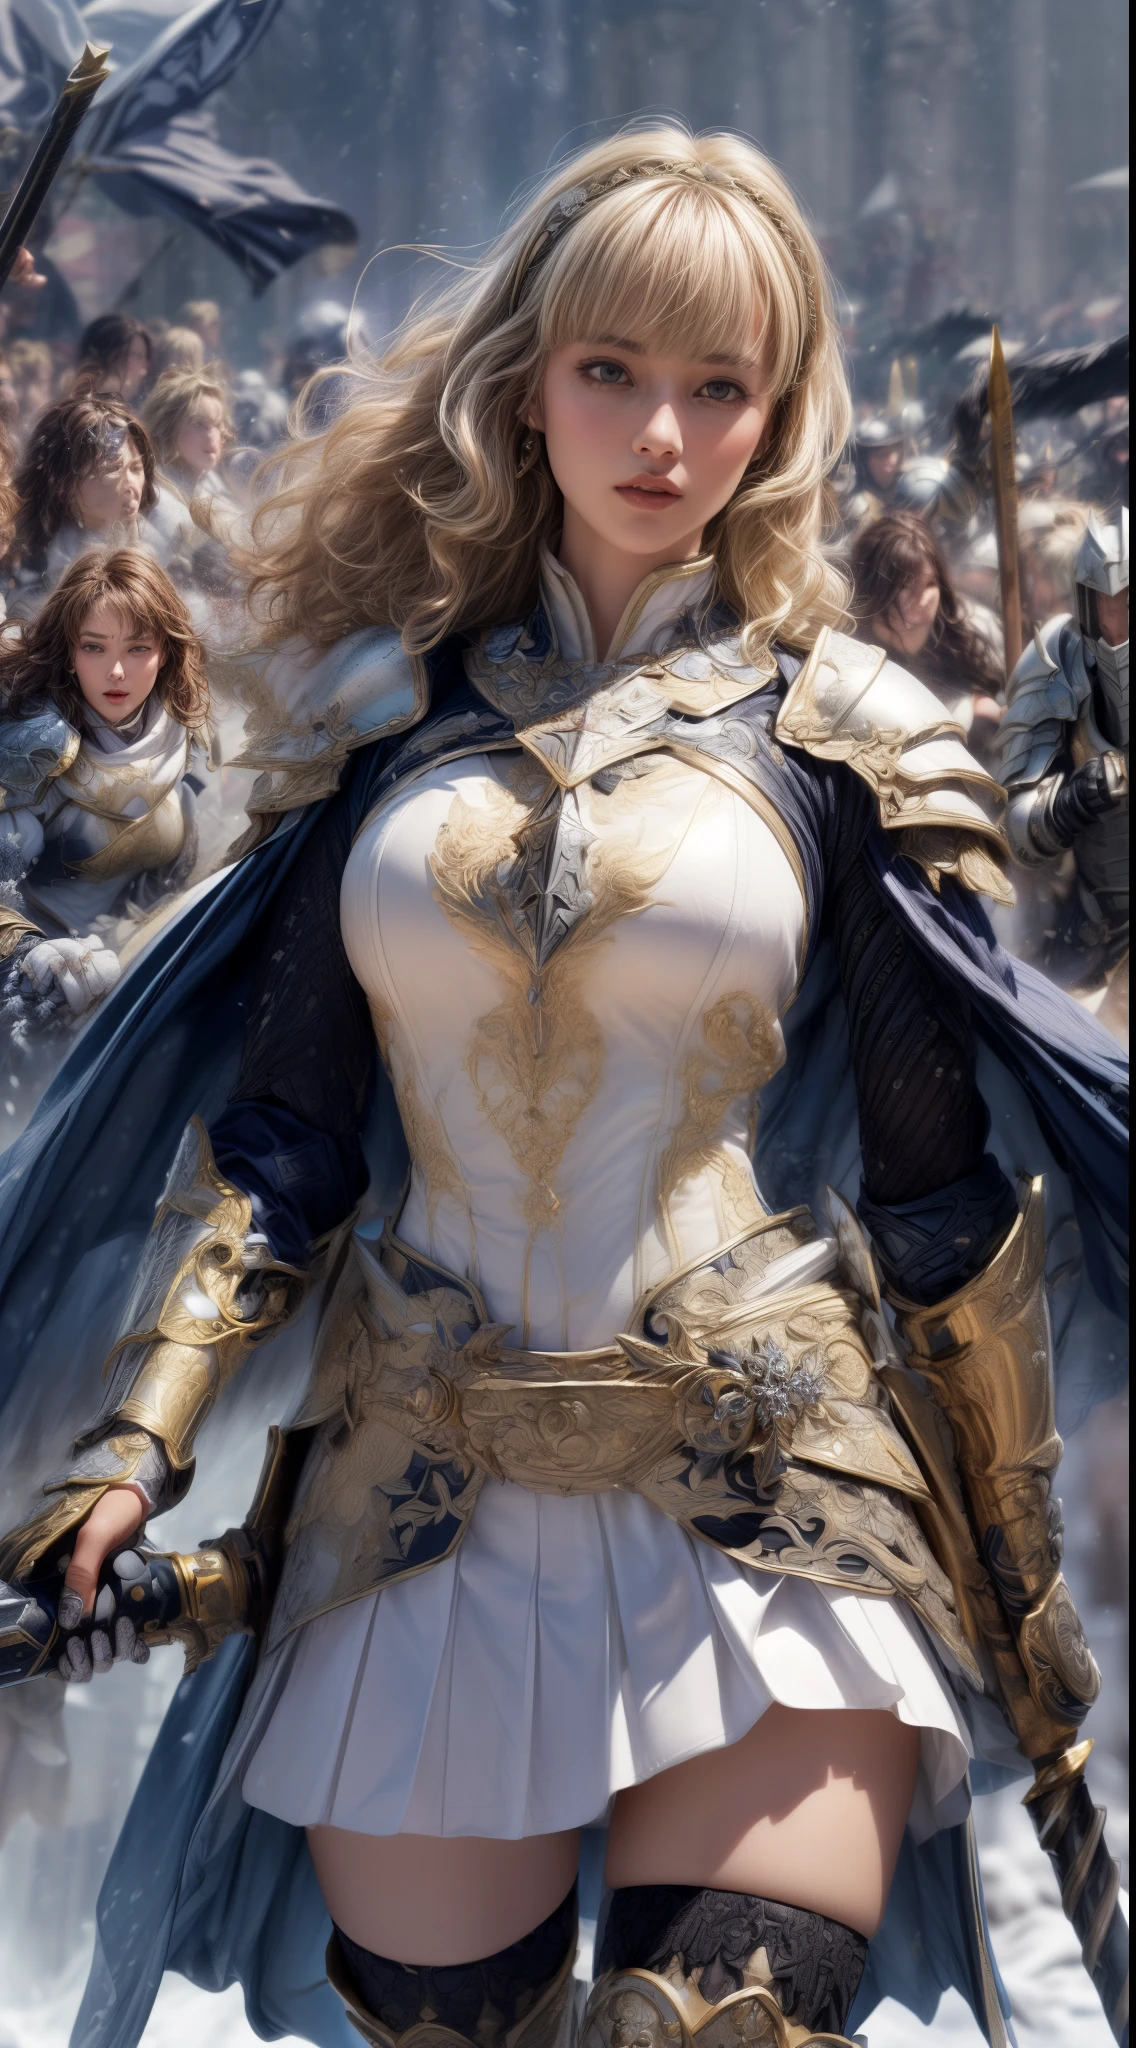 Very beautiful woman、Slender women、(Detailed face)、Realistic Skin、((holy knight)), ((Pearl White Armor))、((((Black armor with very fine and intricate decoration:1.1))))、((Delicate photo))，(Girl Astepeace RAW Photo Details:1.25), (highest quality:1.6), (超A high resolution:1.5), (Realistic:1.75), 8K resolution, Canon EOS R5, 50mm, Absurd, Ultra-detailed,Cinema Lighting,((battlefield))、((battle))、(((White skirt with embellishments)))、Thigh-high socks、Shin Guards、((Blonde))、((Curly Hair))、((Drill Hair))、((Wavy short hair with bangs,))、Get six-pack、Cape、Beautiful Armor、(((Has a huge weapon)))、(In combat)、The wind is blowing、((Symmetrical Armor))、((((Blizzard))))、(((Leading a large group of knights:1.2)))、Banner、